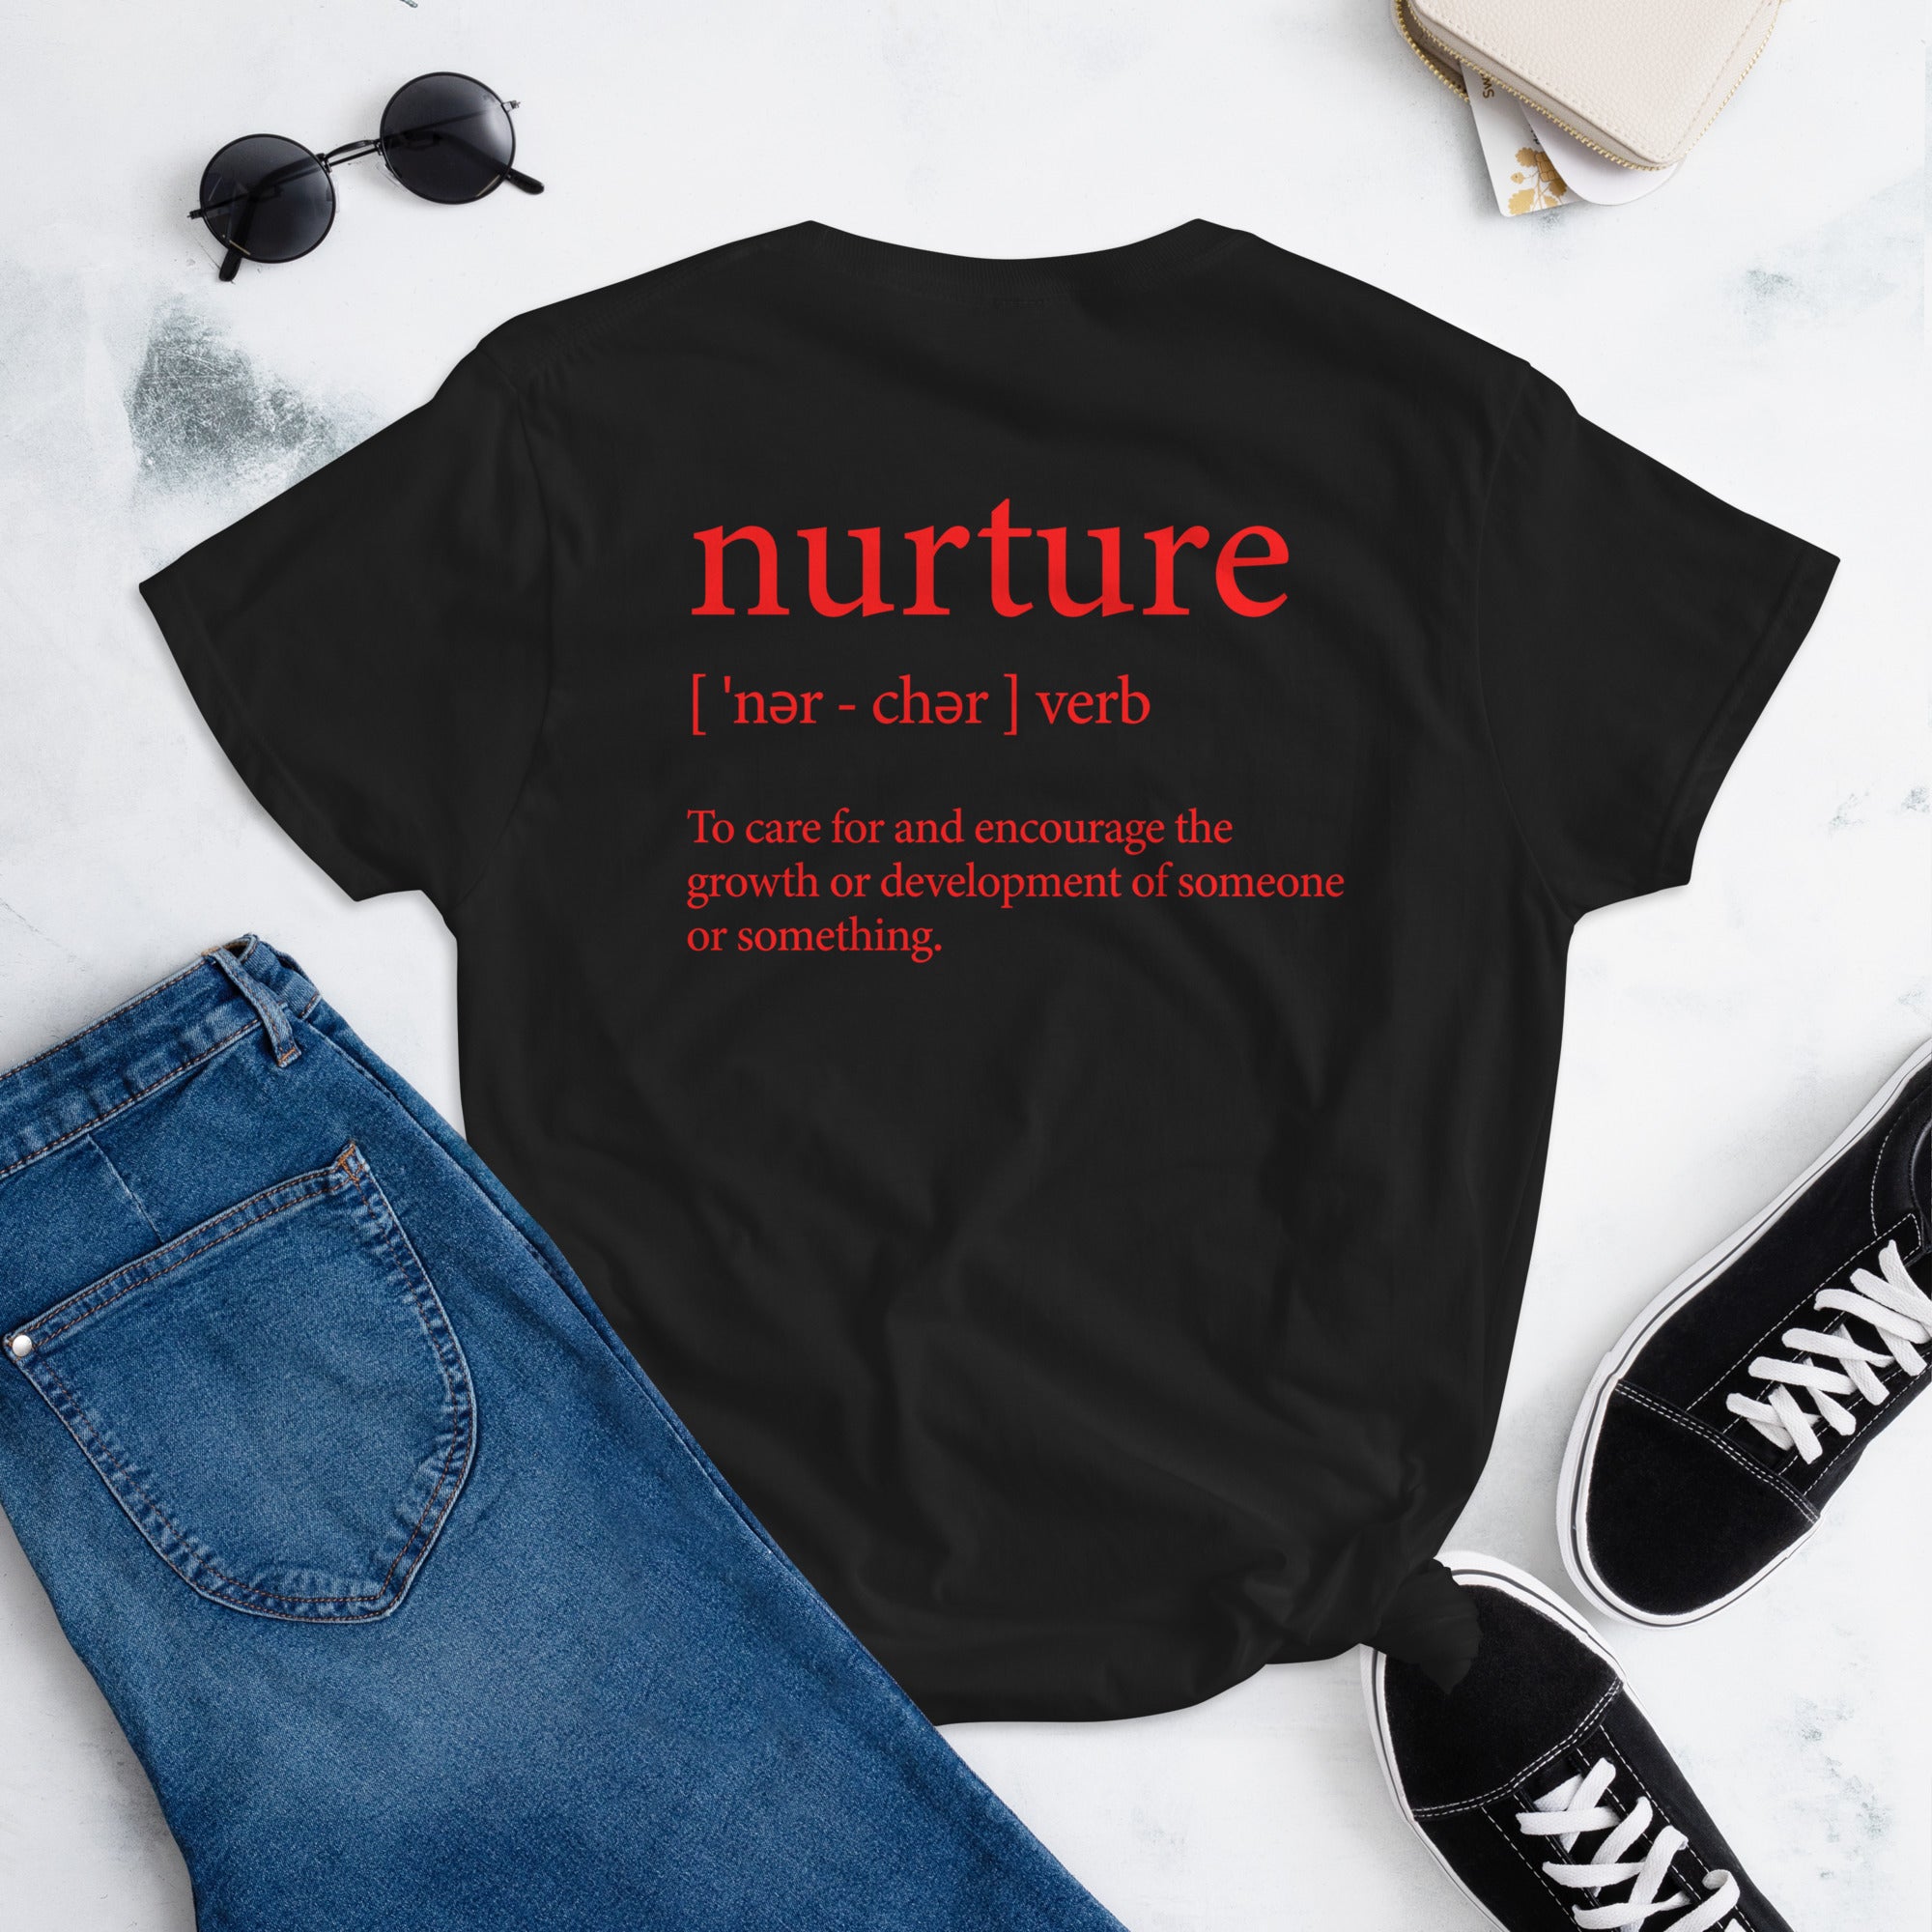 Nurture Your Roots Women's Short Sleeve T-Shirt Special Edition